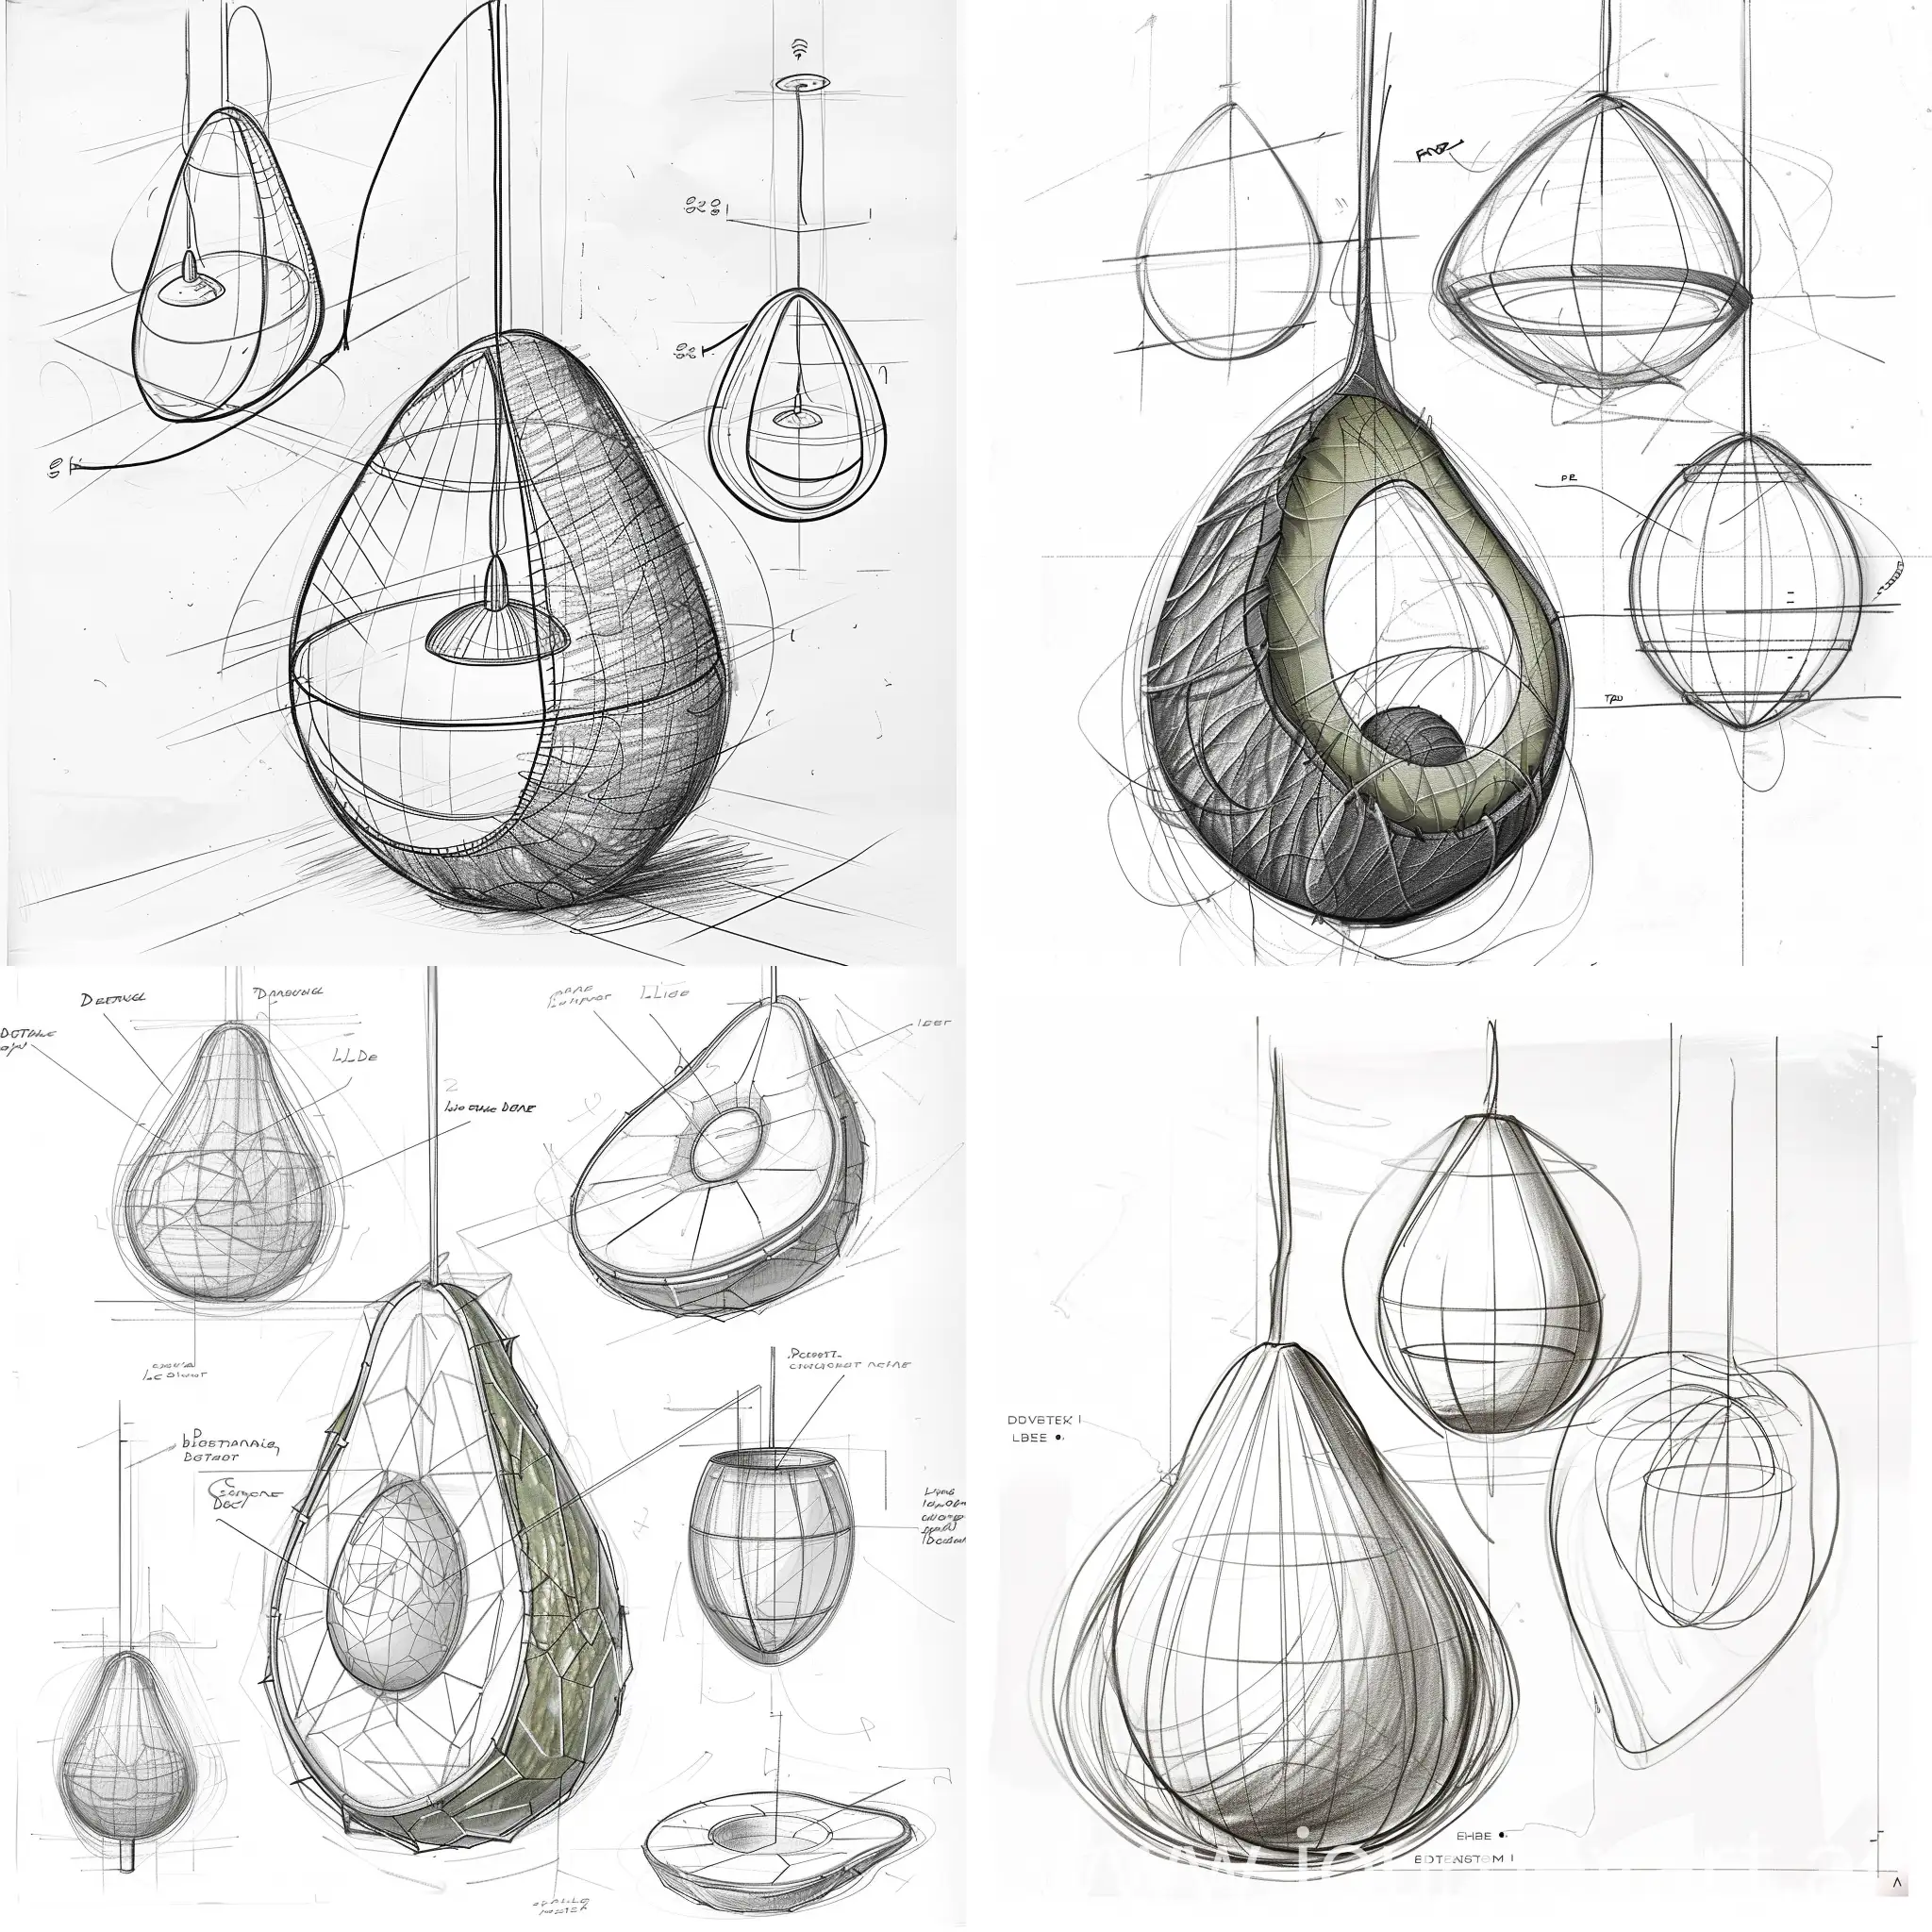 AvocadoShaped-Tumbler-Lighting-Design-Sketch-Crafted-Simplicity-and-Line-Detail